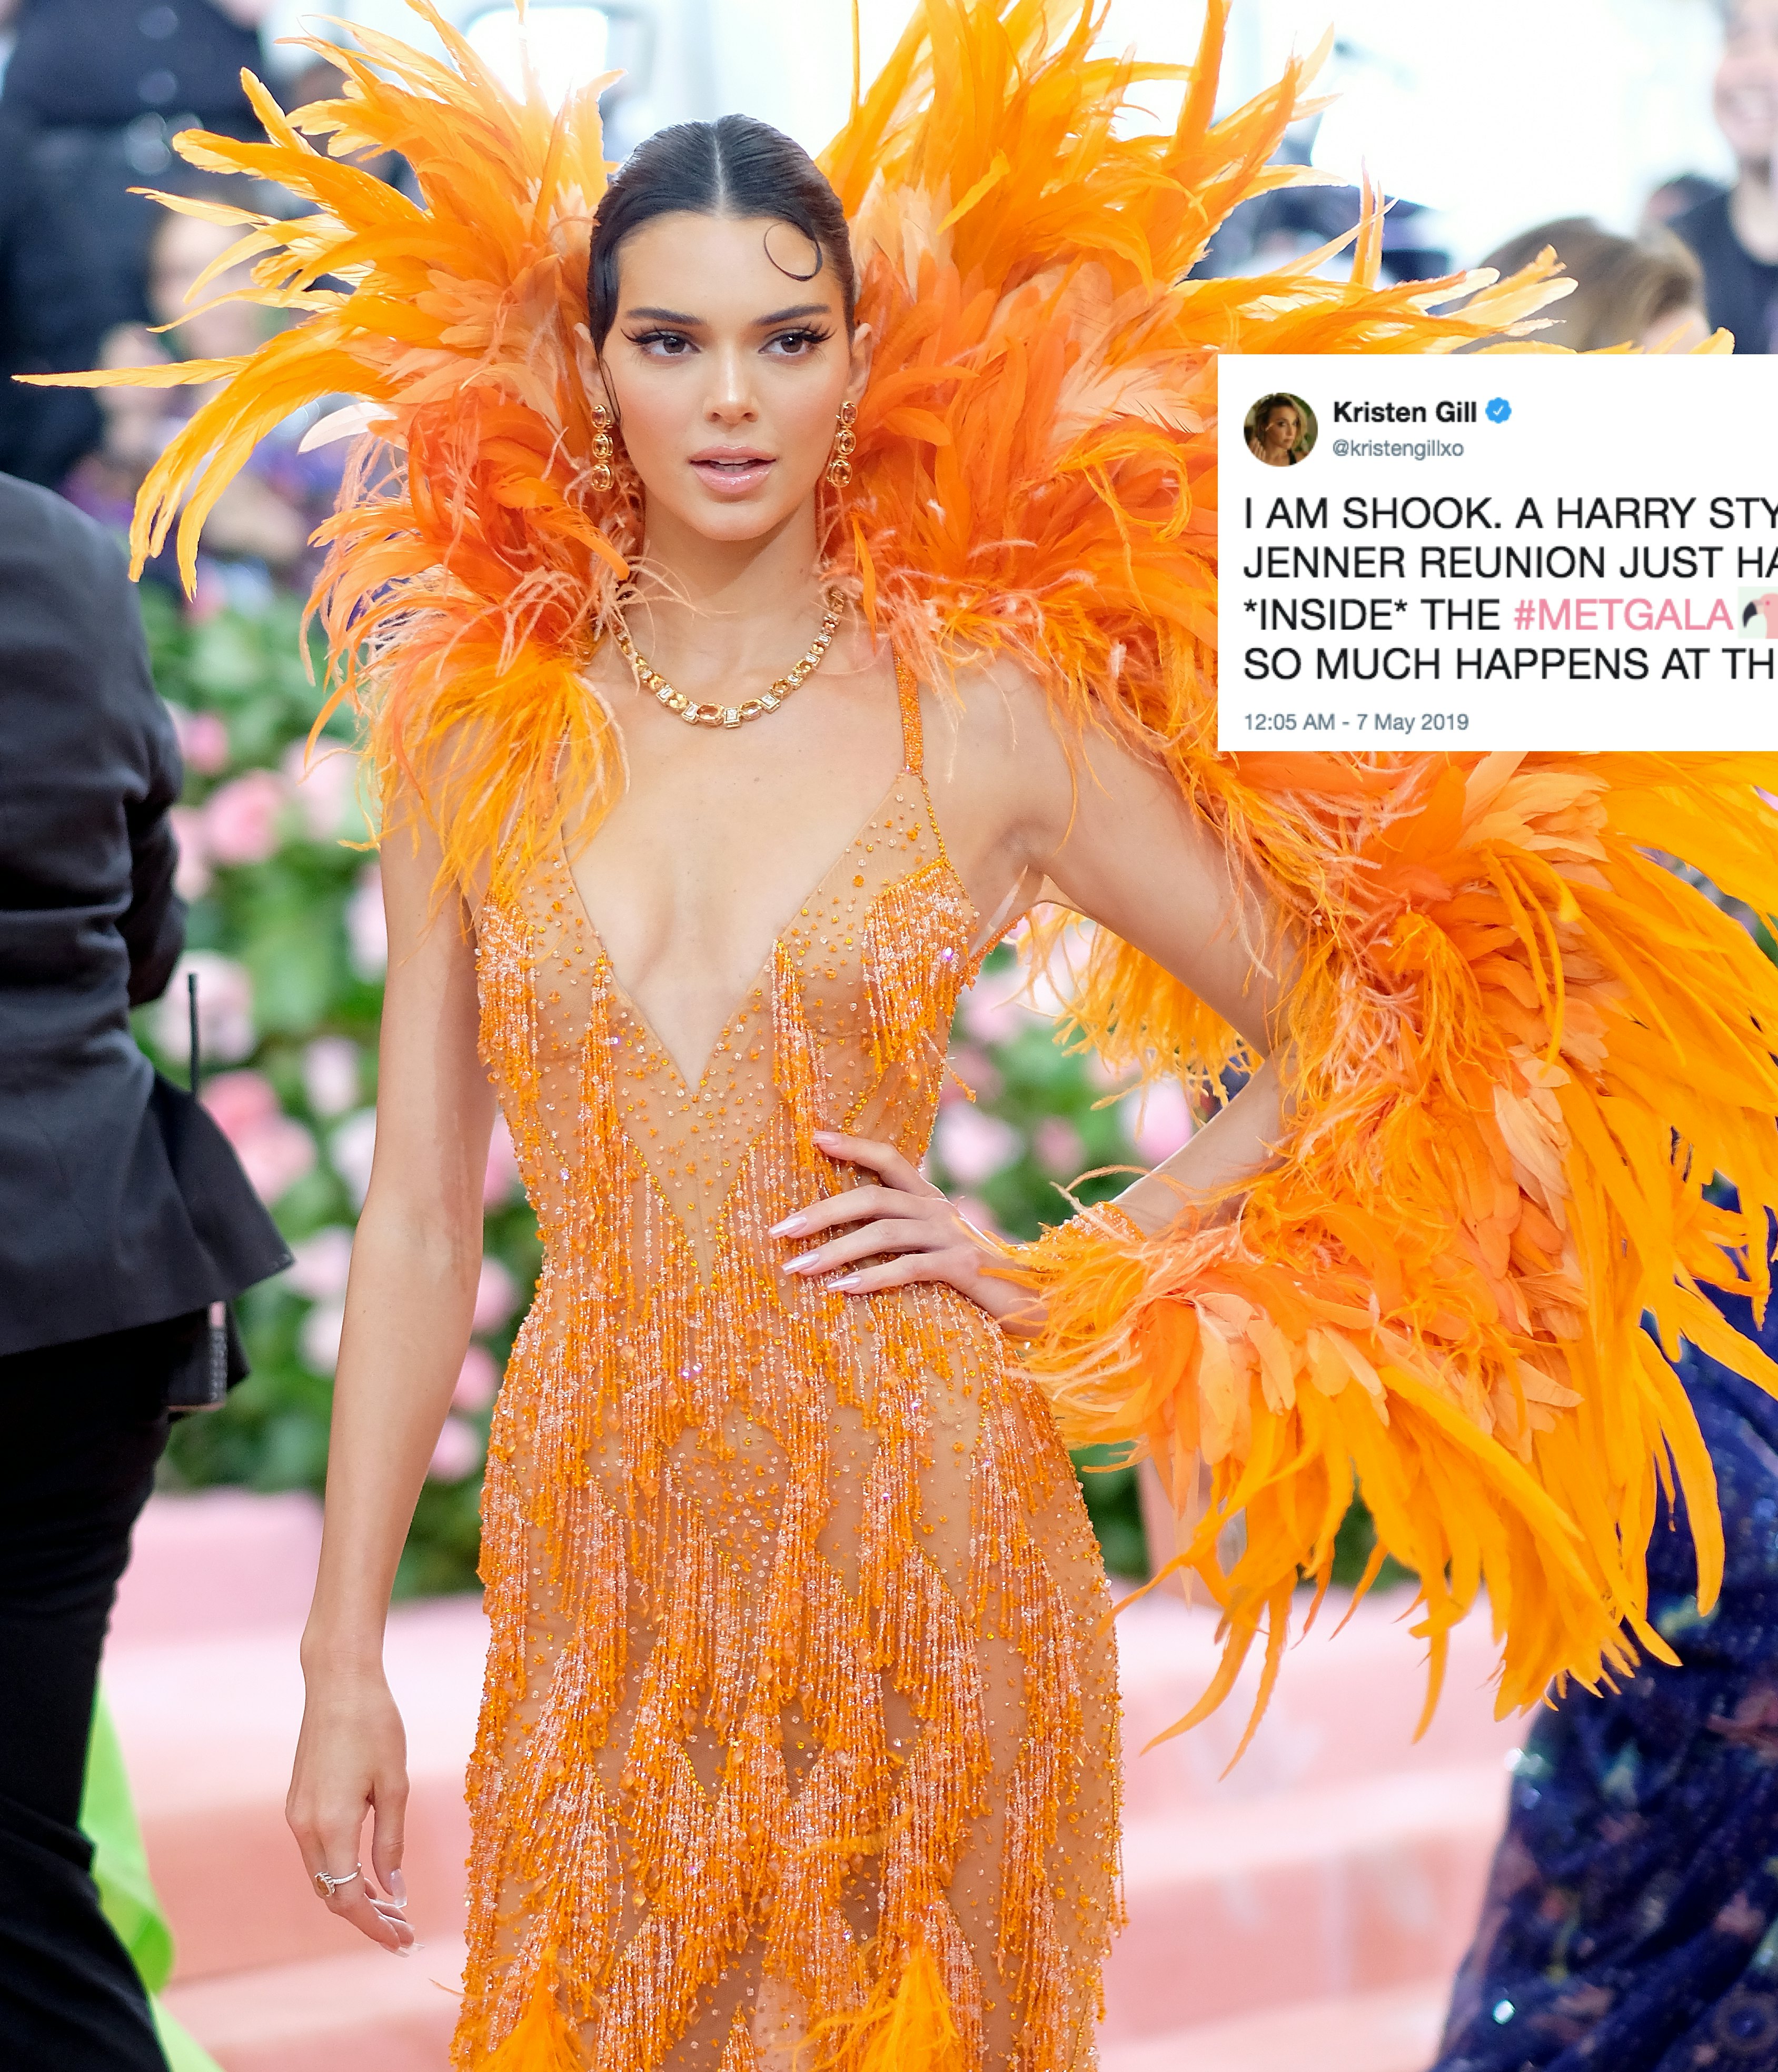 Kendall Jenner Harry Styles Met Gala Reunion Sparked A